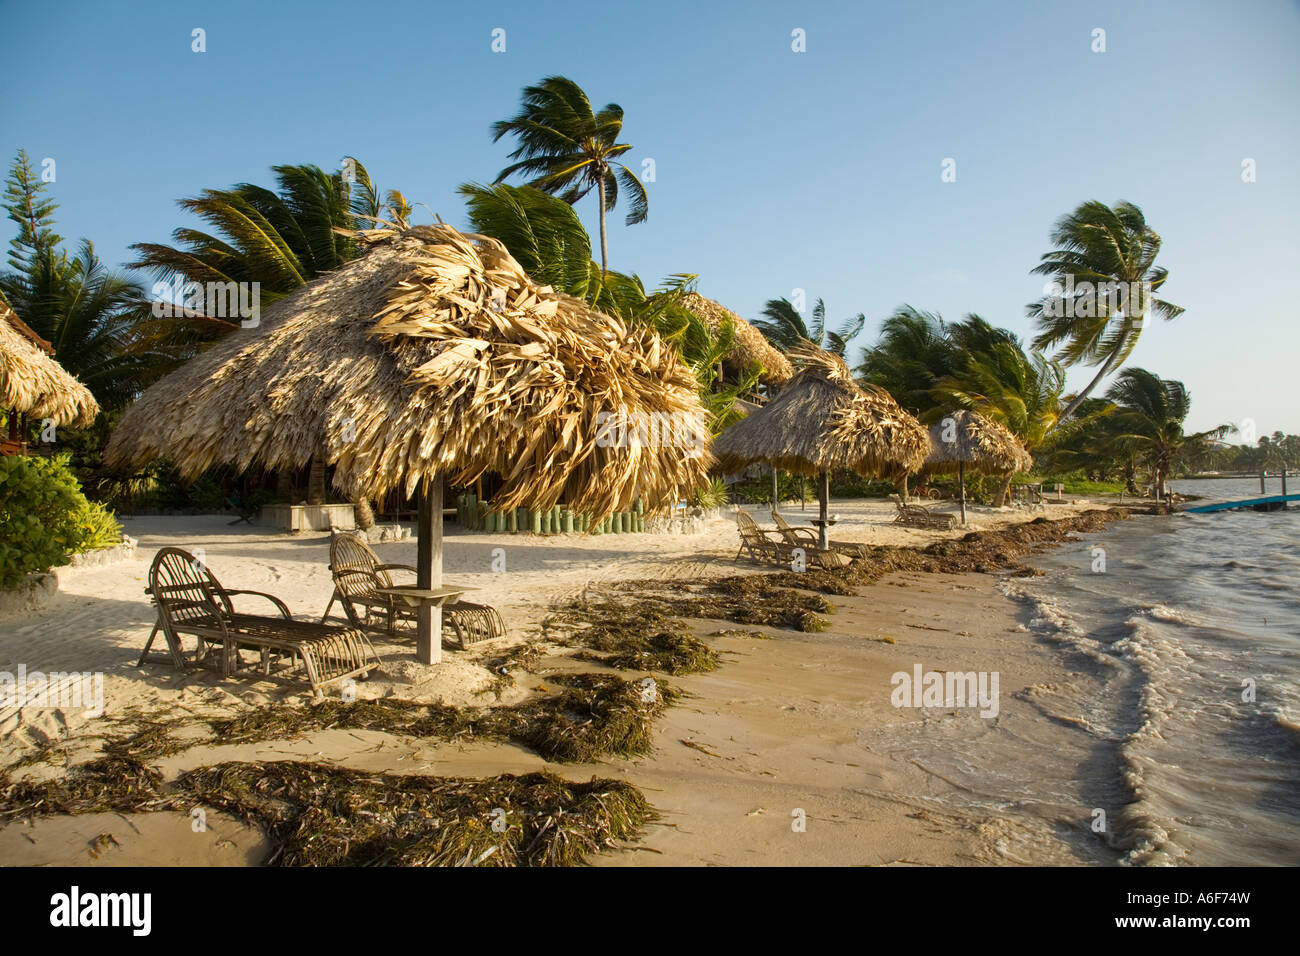 BELIZE Ambergris Caye Seaweed on beach along shore thatched umbrellas chaise lounge chairs waves in water Stock Photo